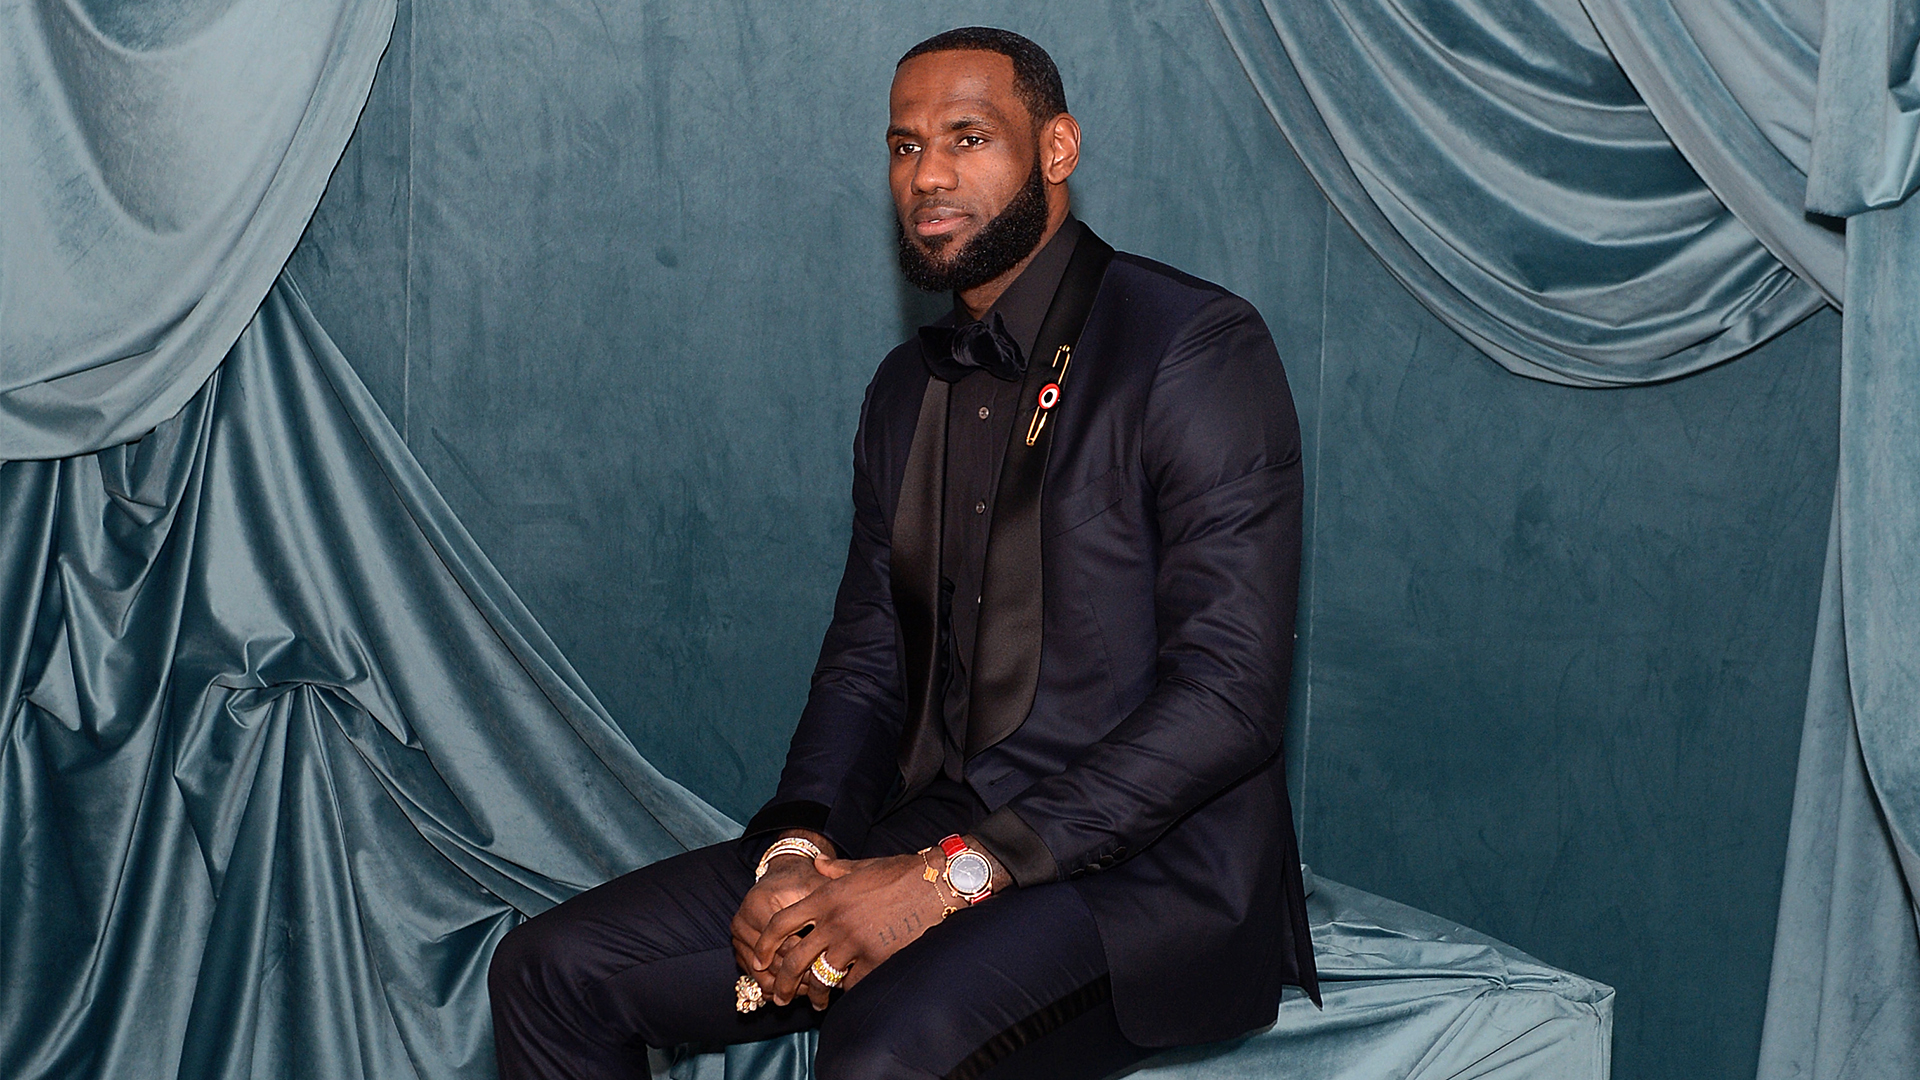 LeBron James Becomes Part-Owner Of NHL's Pittsburgh Penguins In $900M FSG Deal